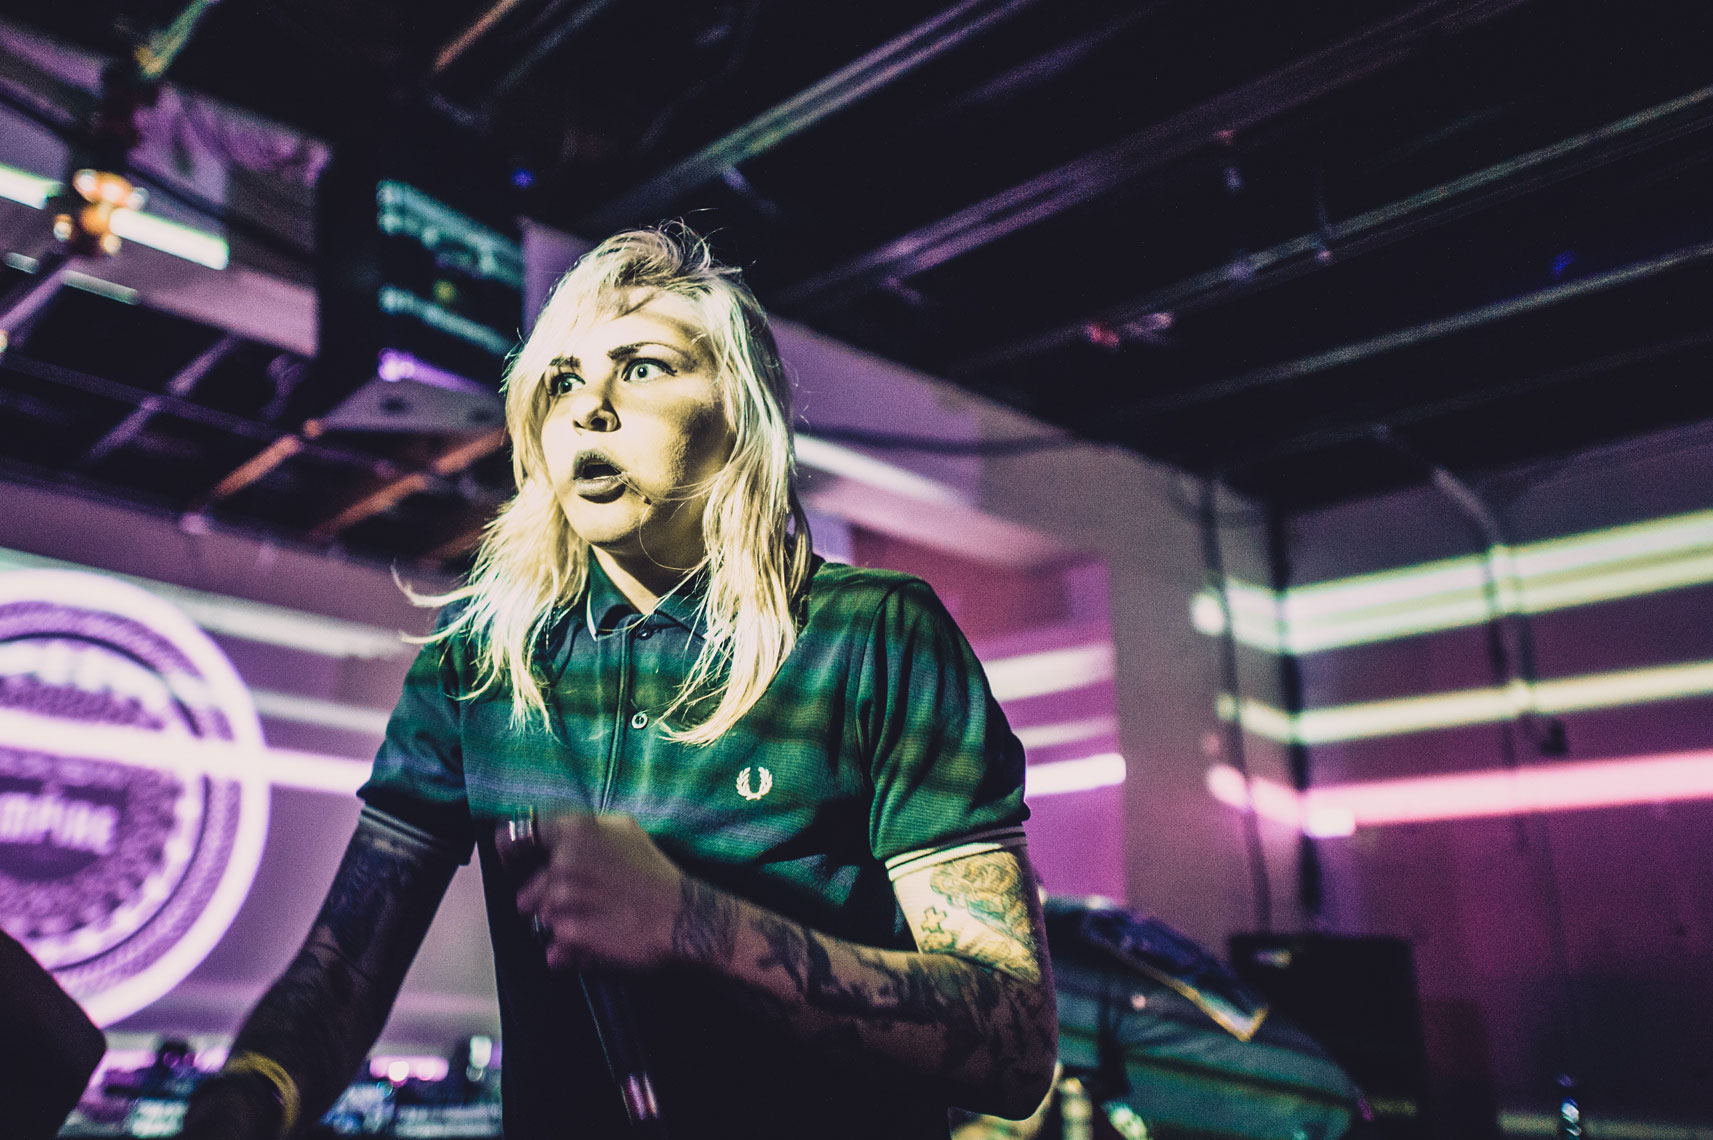 Youth-Code-performs-at-the-Empire-Control-Room-during-SXSW-2014